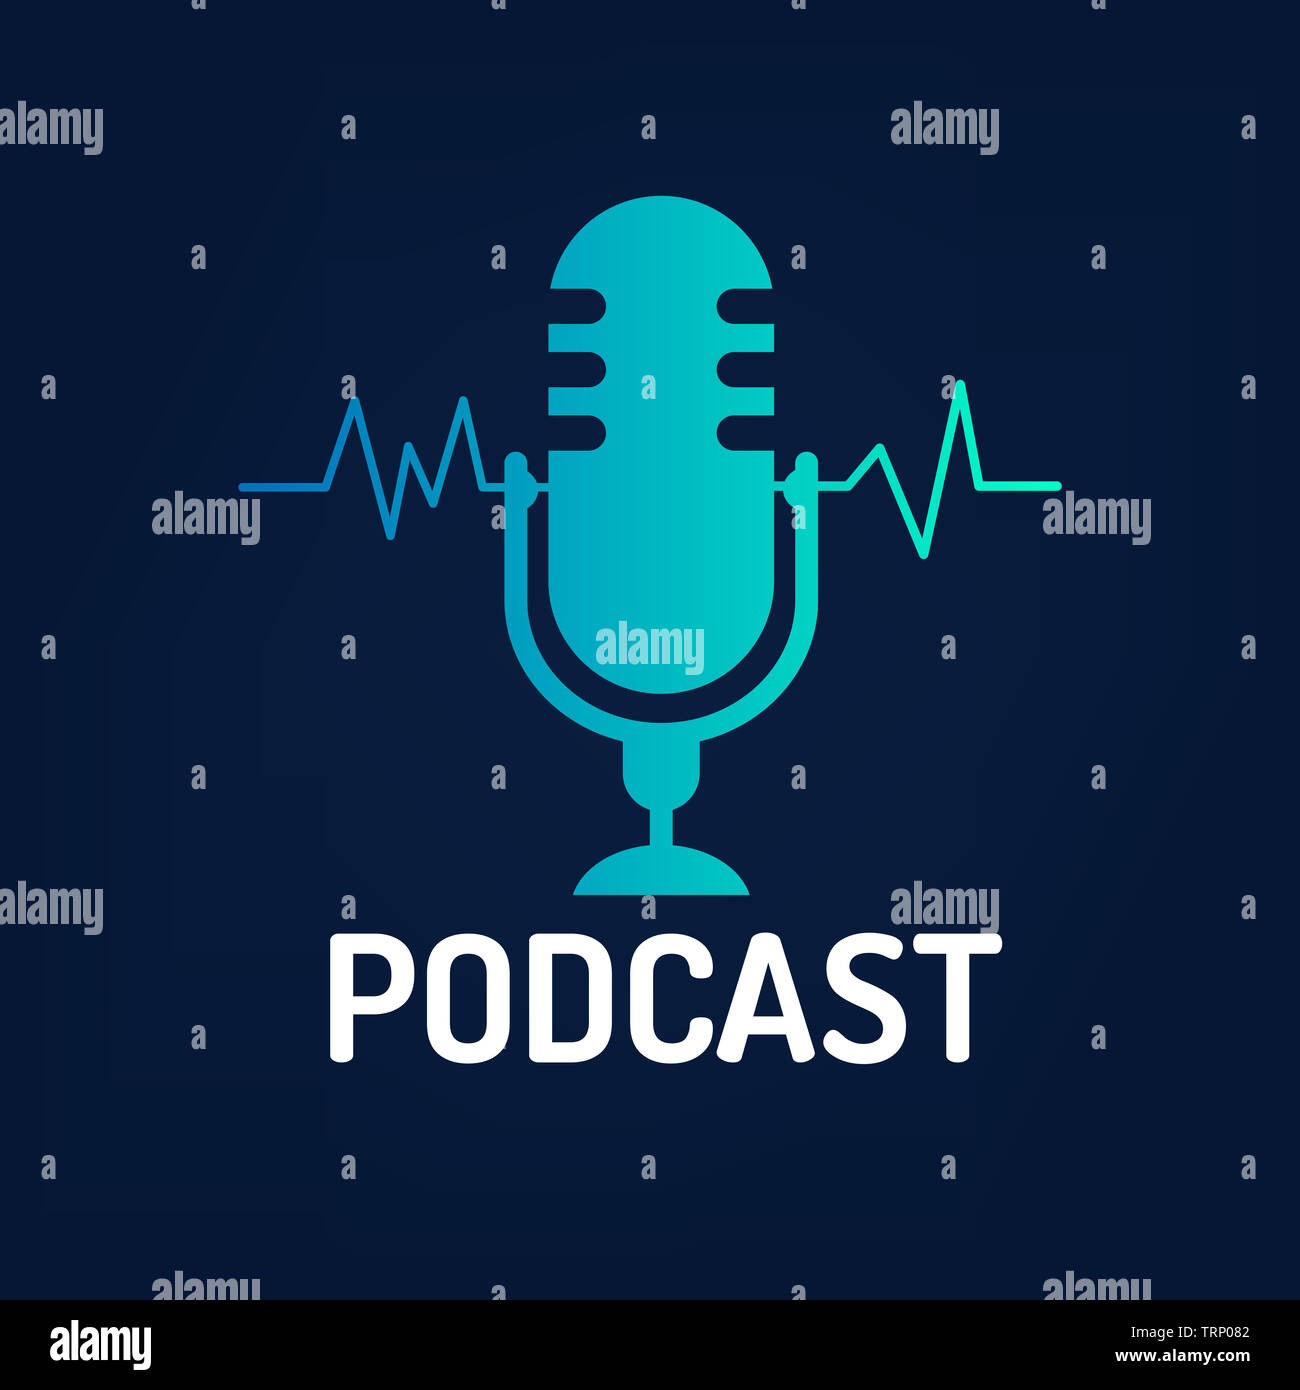 logo or icon podcast with wave on dark background ,vector graphic Stock Photo